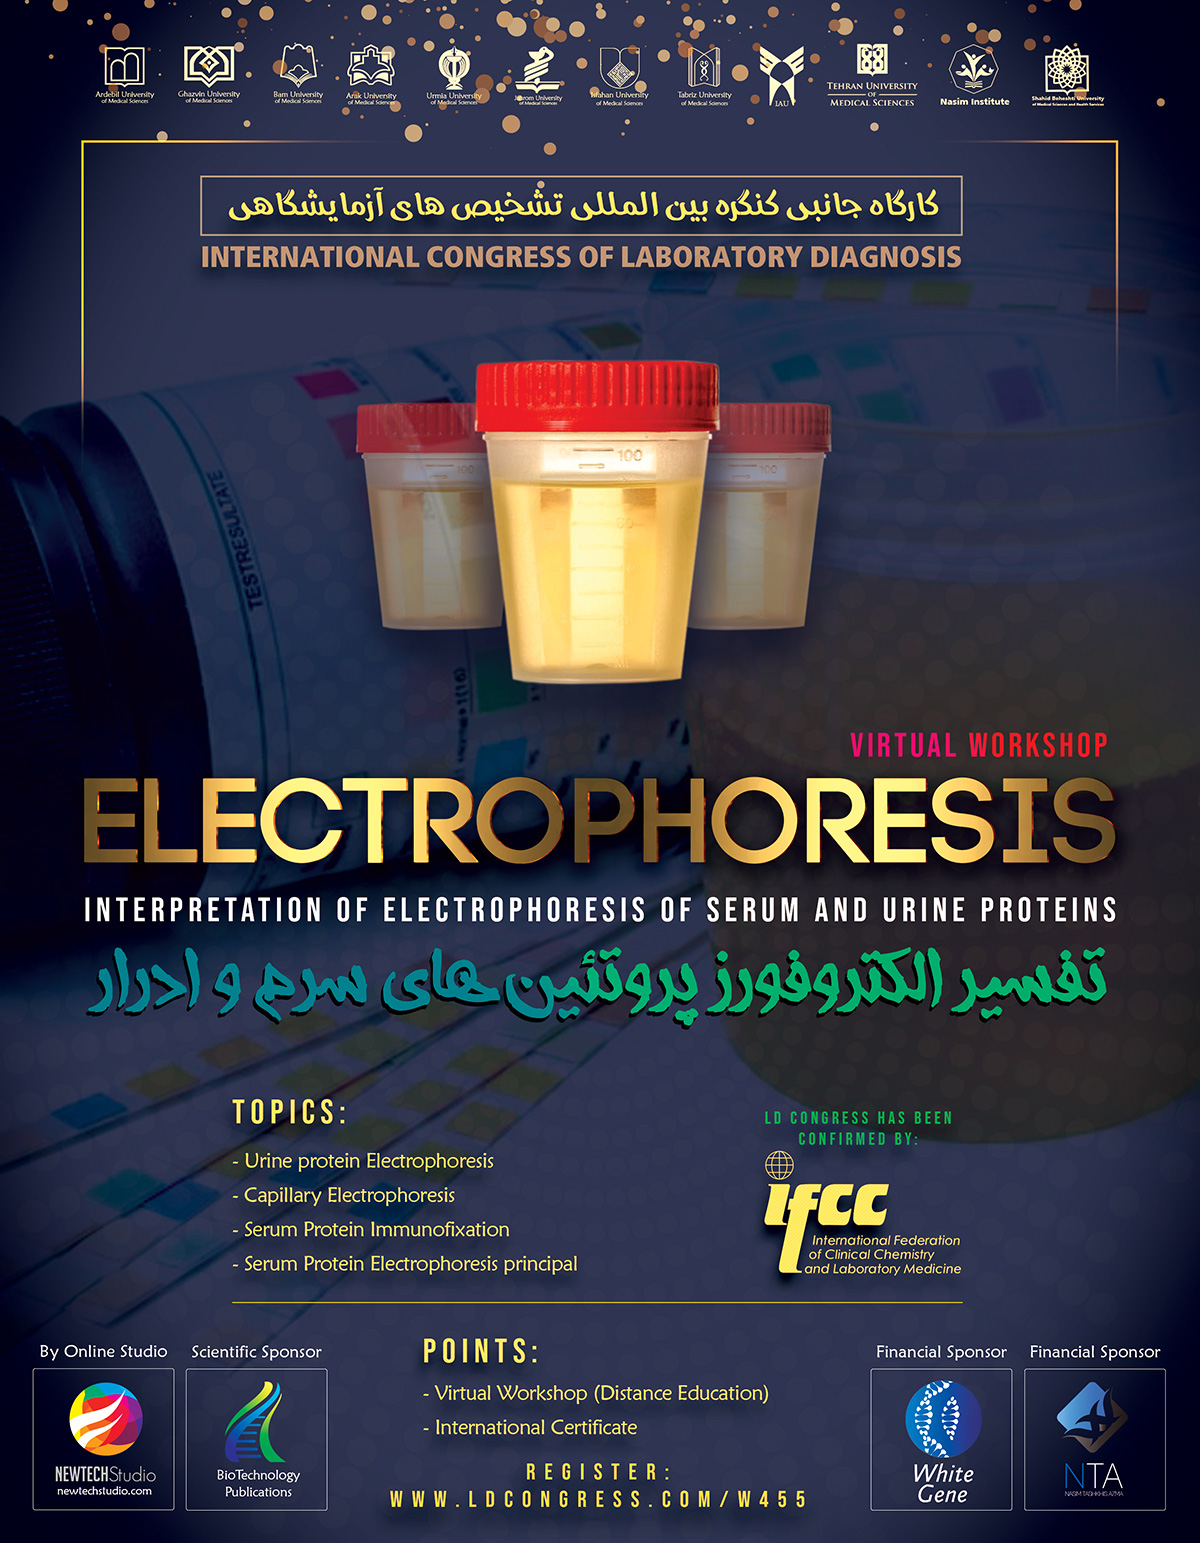 Serum and Urine Protein Electrophoresis and Immunoelectrophoresis and capillary electrophoresis